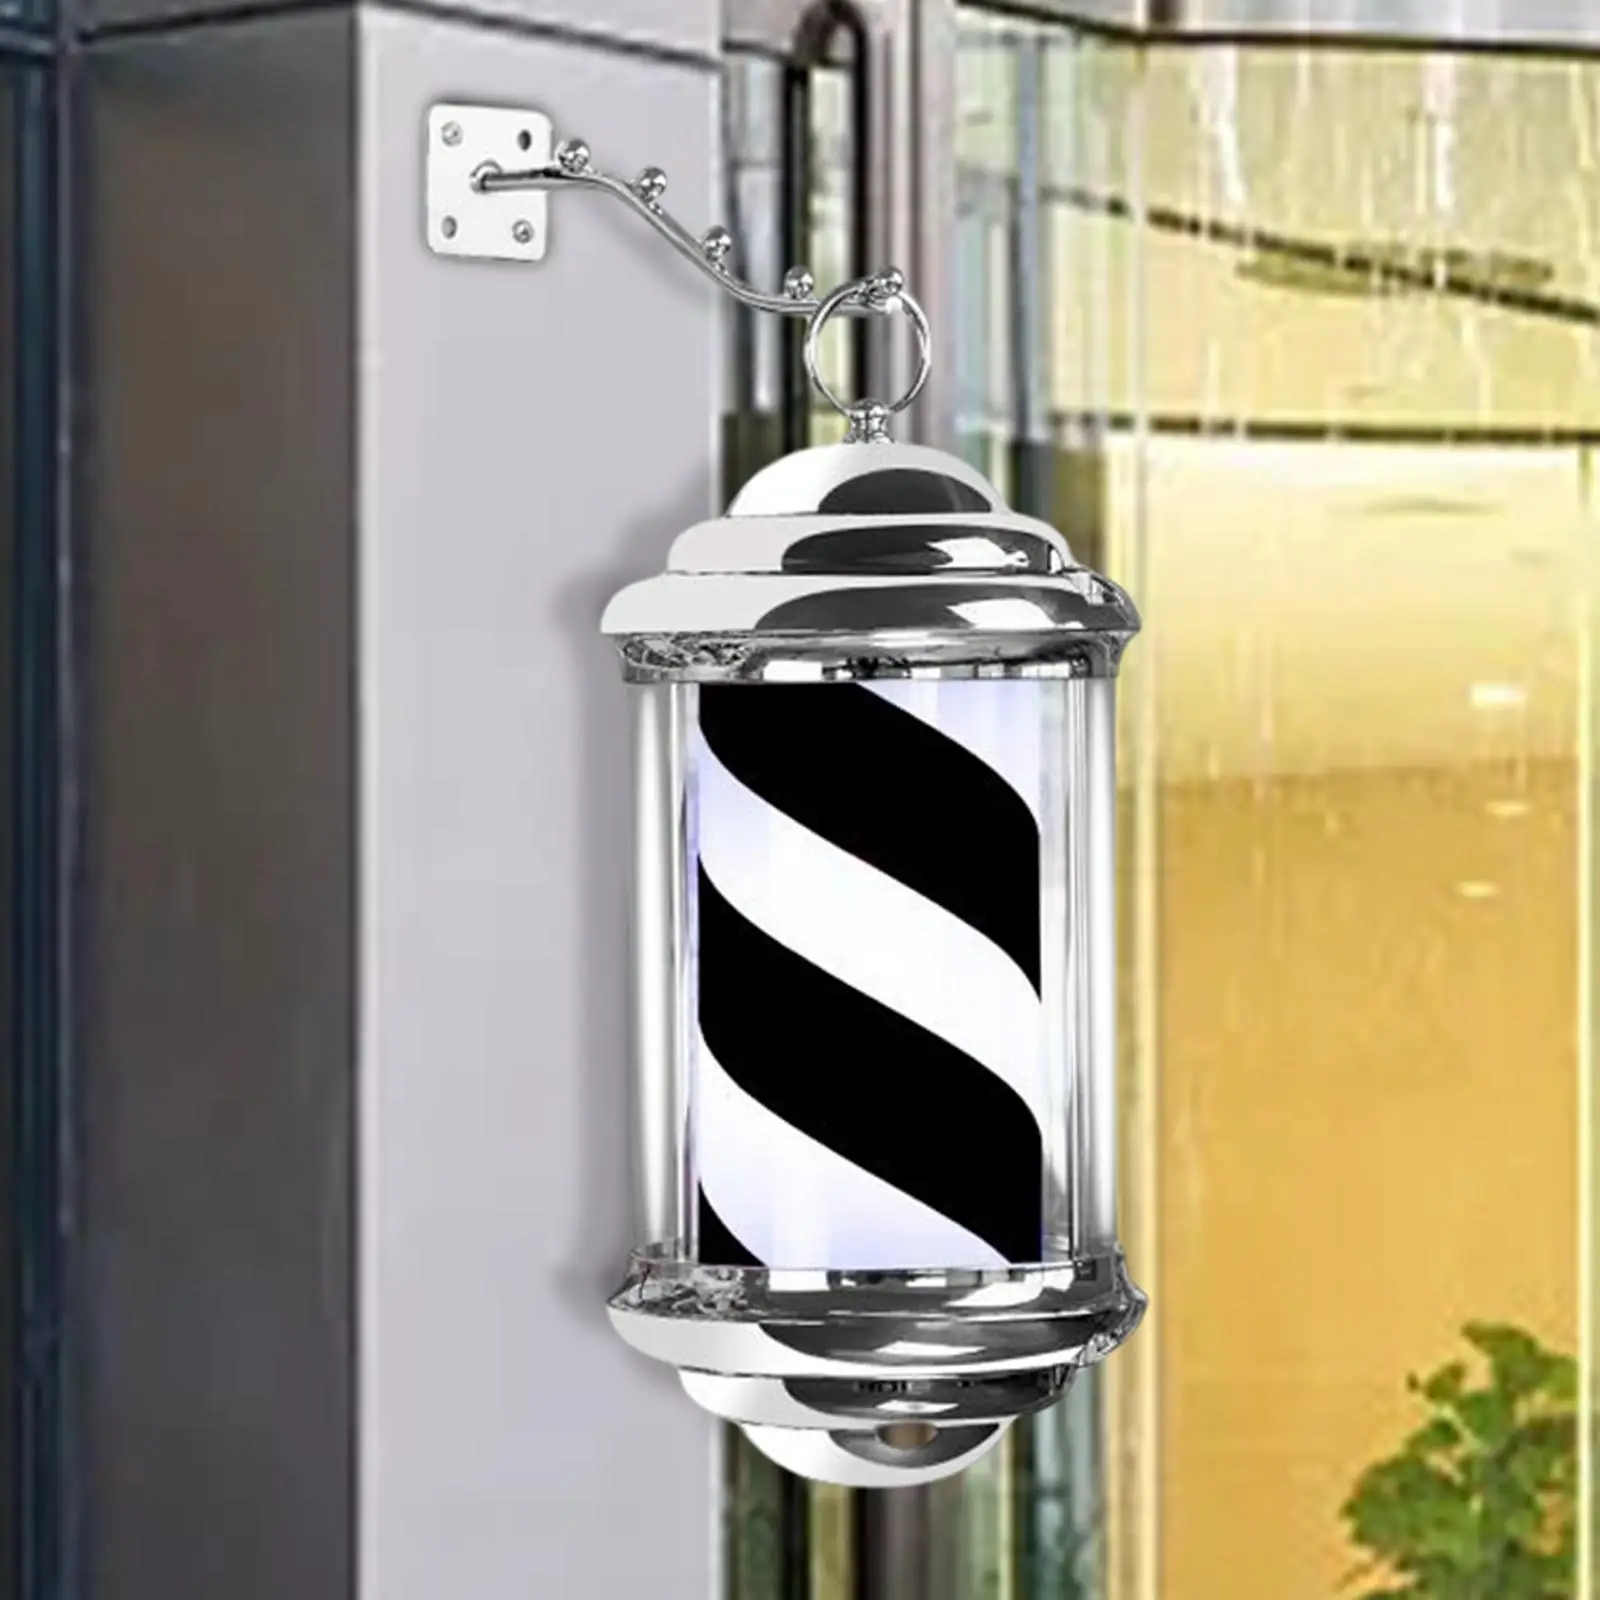  Salon Sign Light Rotating  Saving Wall Mount Wall / Hanging Bracket Stripes Retro Style Barber Pole Light for Outdoor